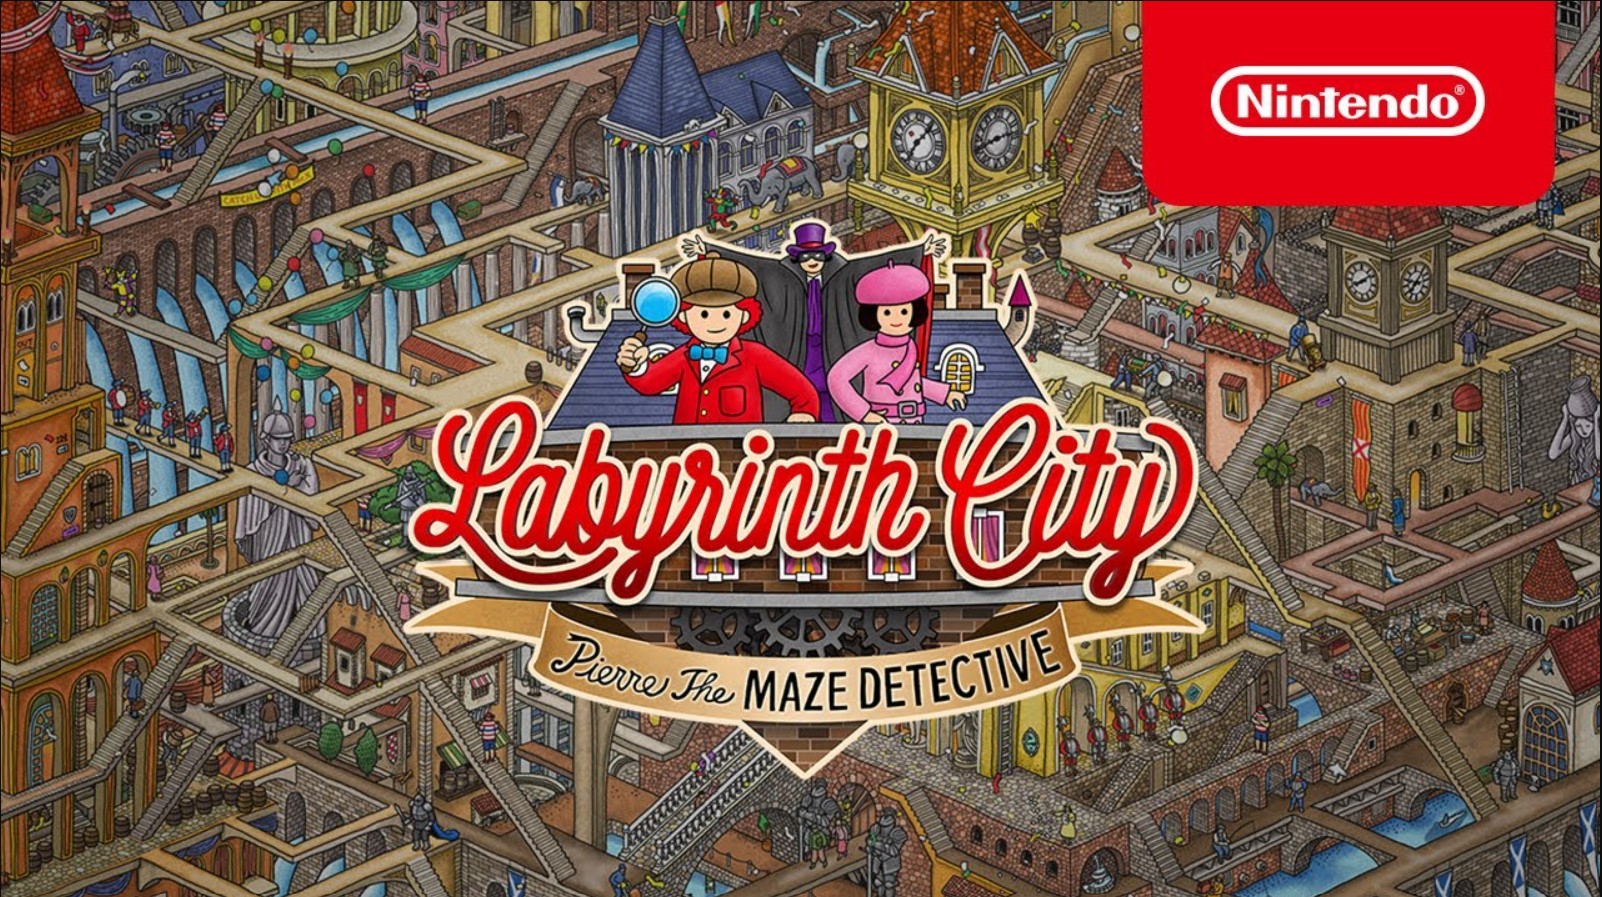 Labyrinth City Pierre the Maze Detective free download full version for pc with crack